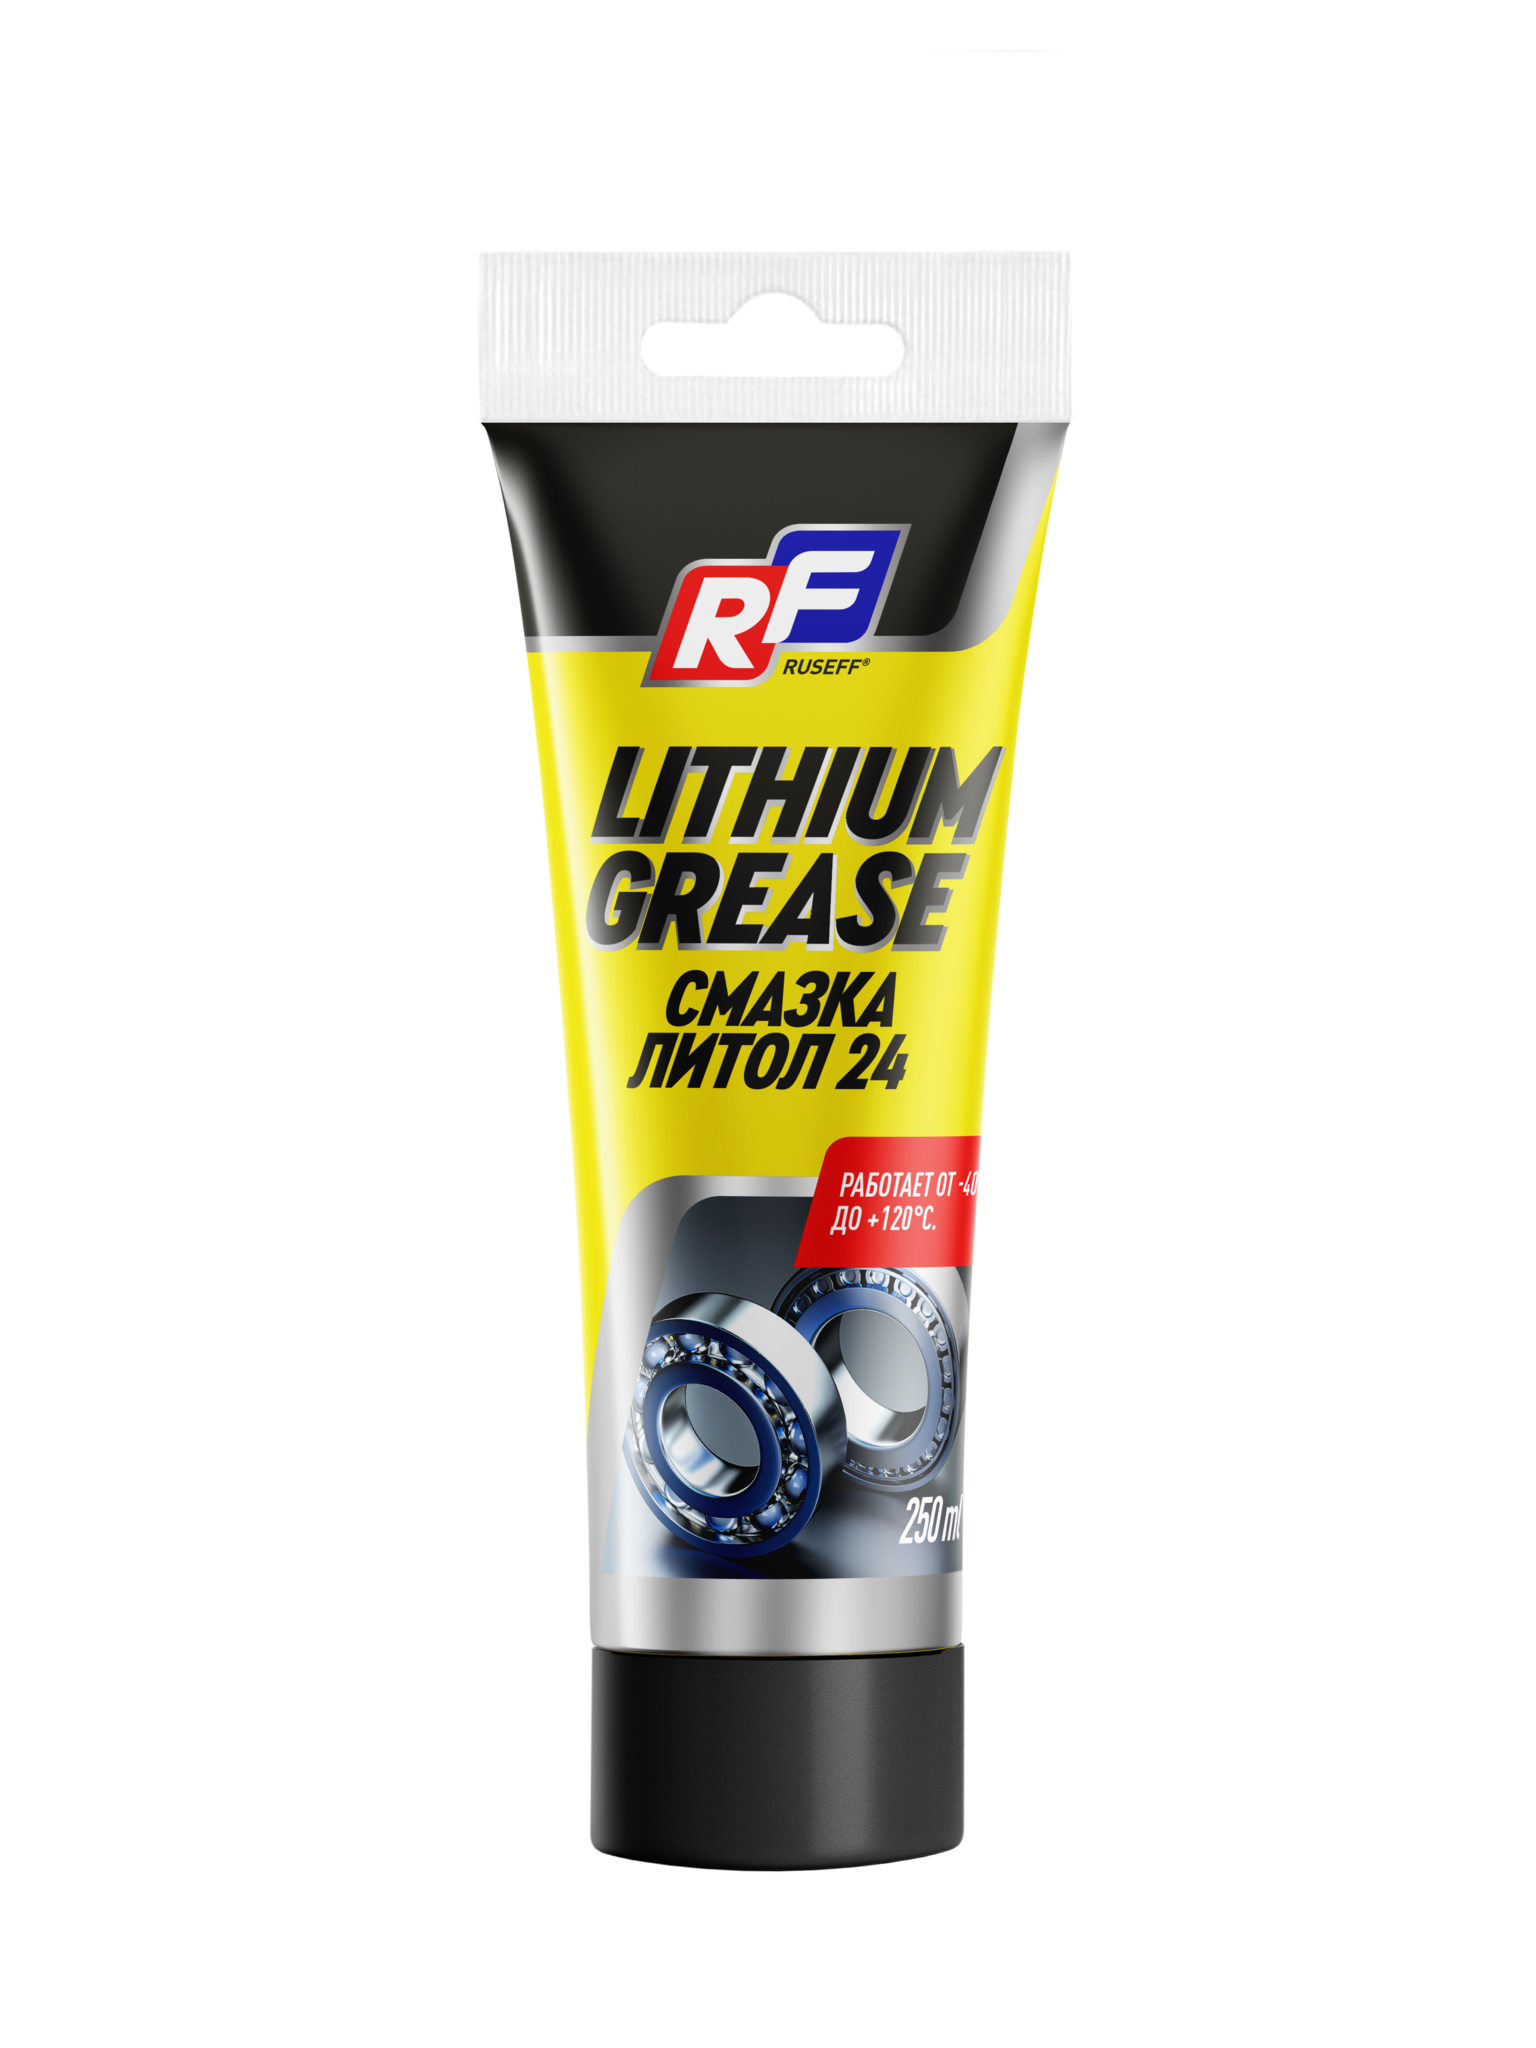 Ruseff Lithium Grease Смазка Литол-24